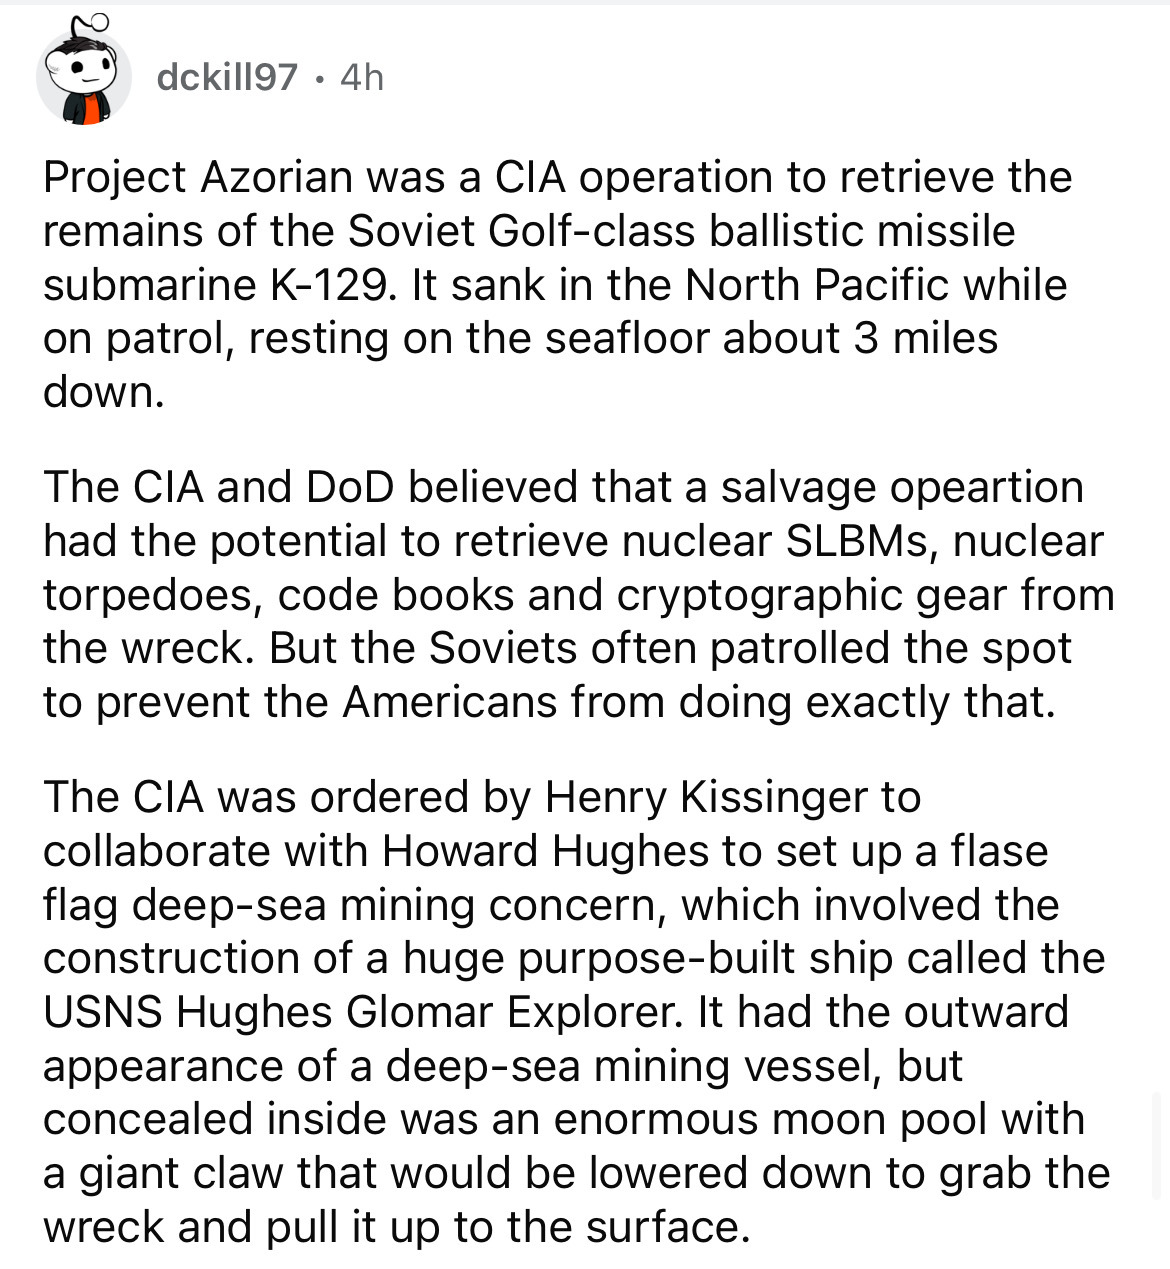 document - dckill97 4h Project Azorian was a Cia operation to retrieve the remains of the Soviet Golfclass ballistic missile submarine K129. It sank in the North Pacific while on patrol, resting on the seafloor about 3 miles down. The Cia and DoD believed